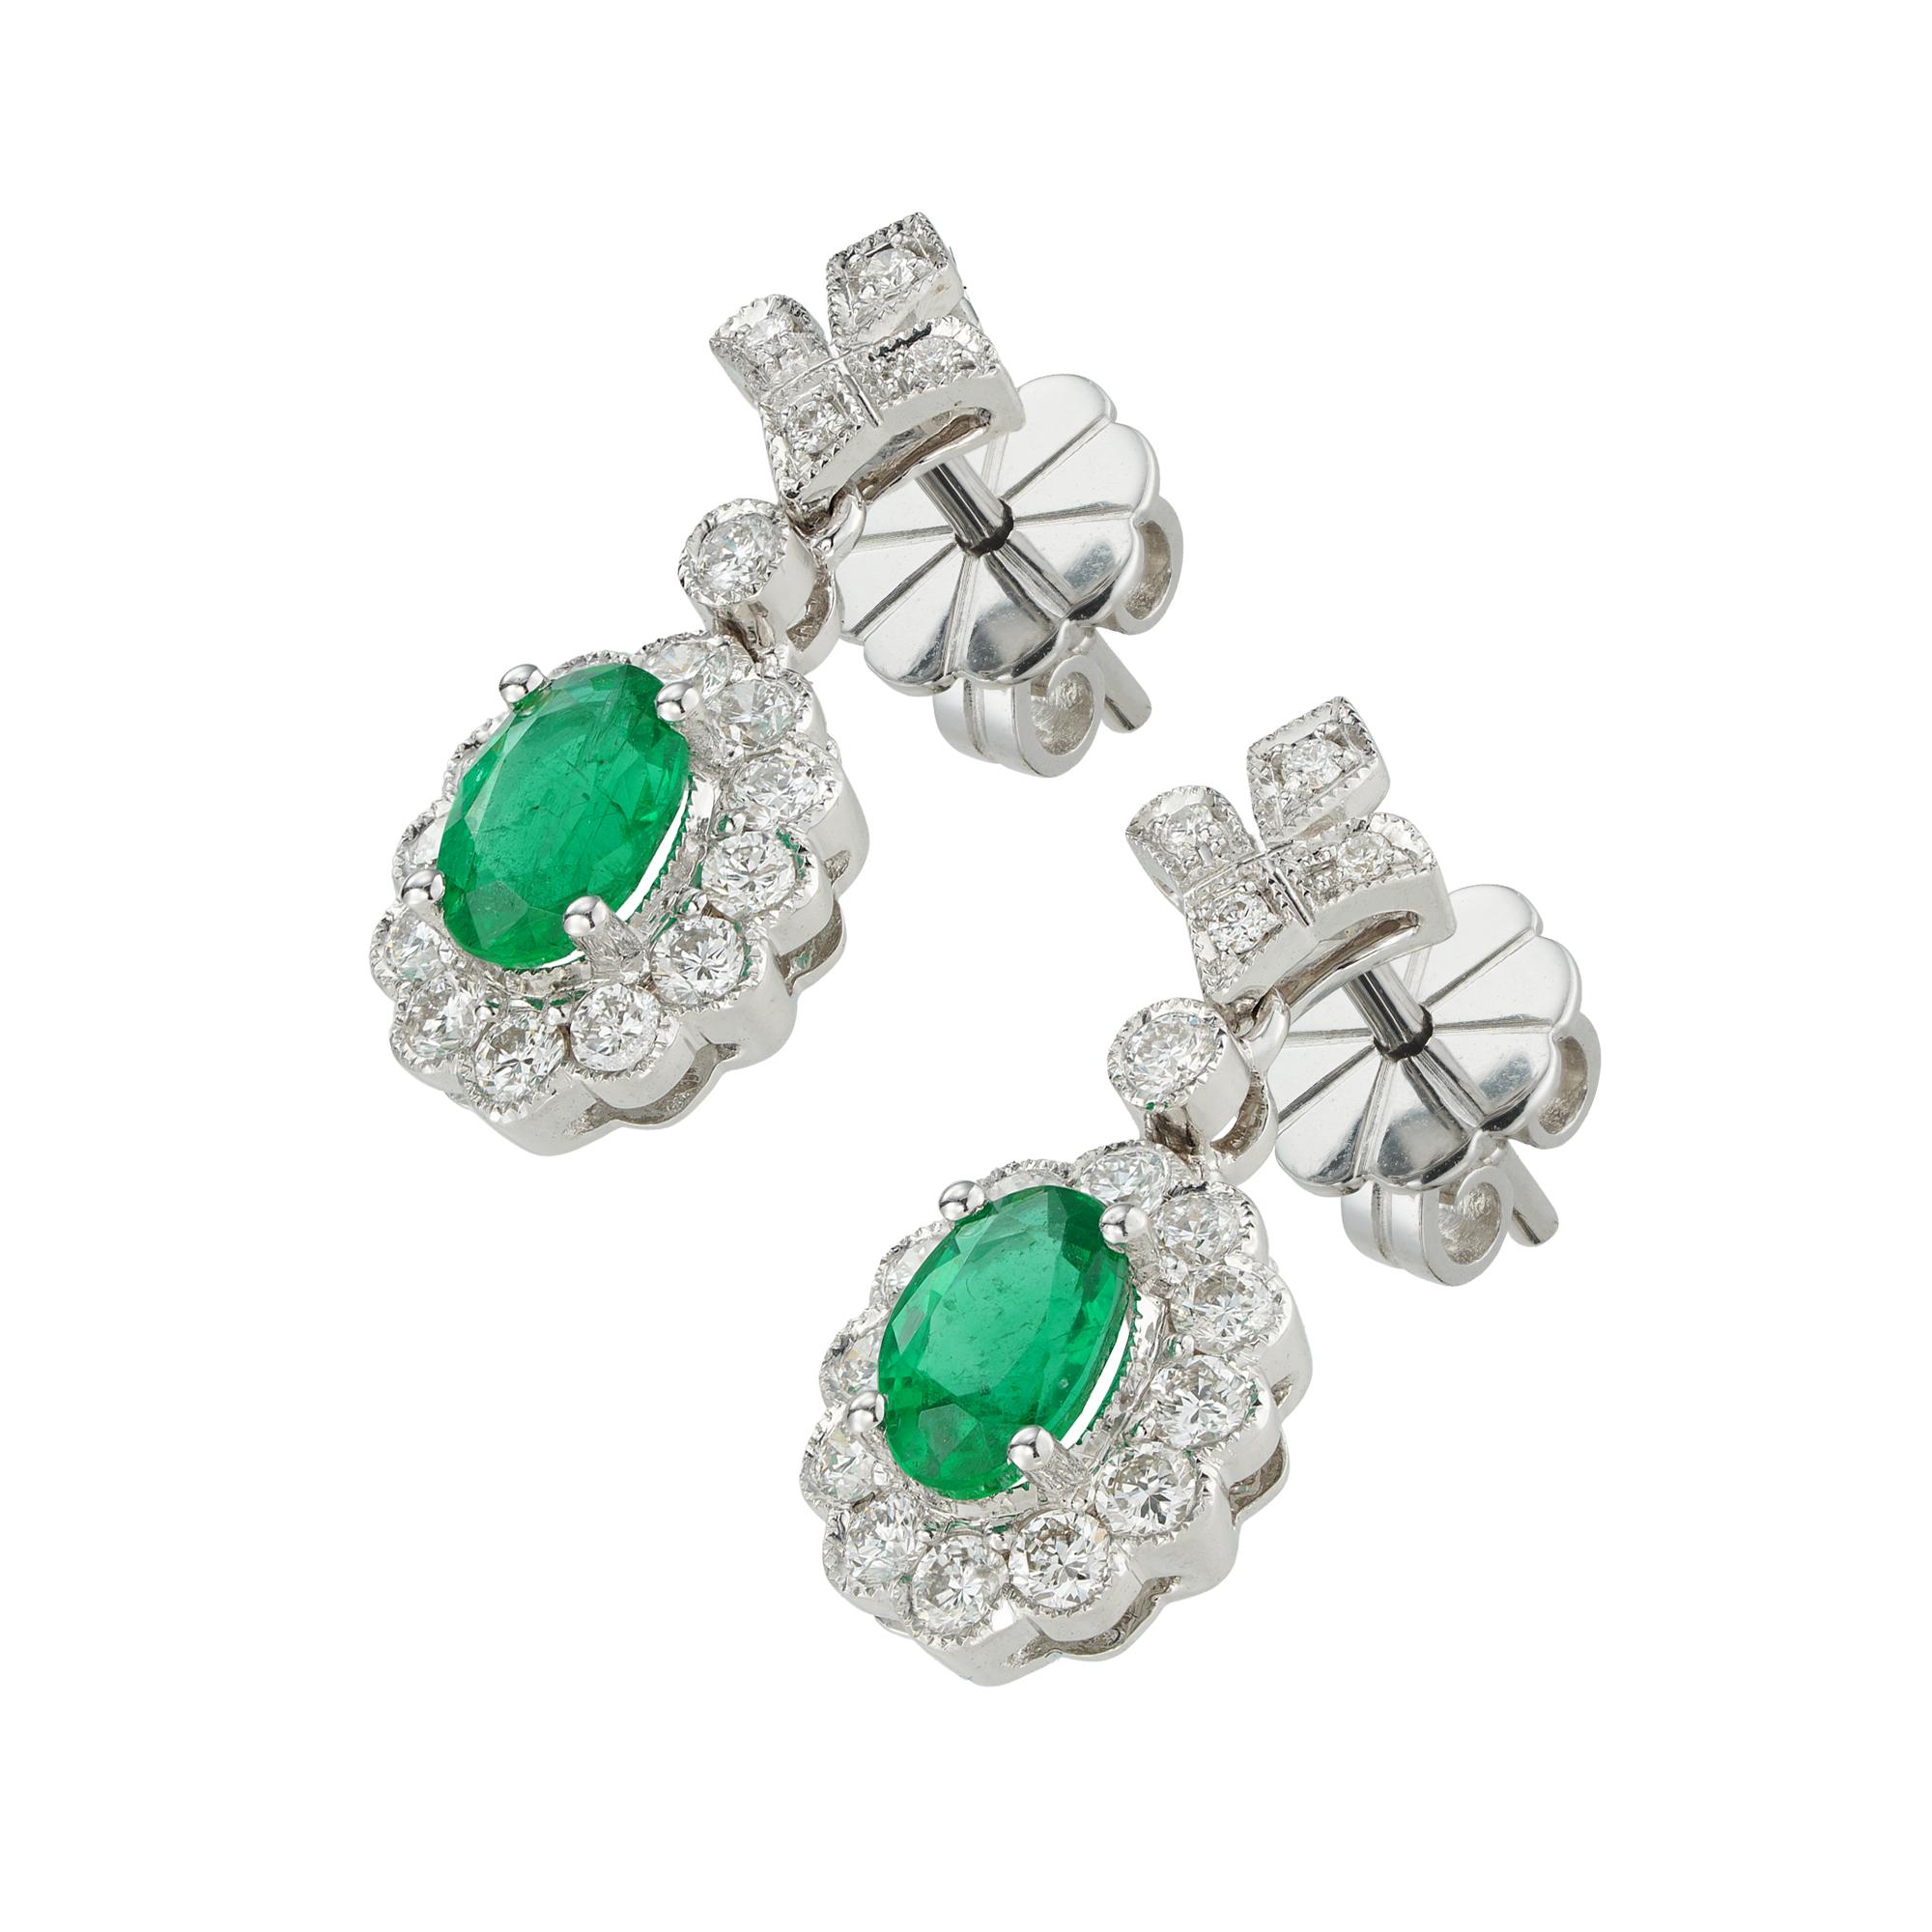 A pair of emerald and diamond drop cluster earrings, the two oval faceted emeralds weighing 0.87 carats in total, each surrounded by twelve small round brilliant-cut diamonds and suspended by a fleur-de-lys diamond-set top, the diamonds weighing